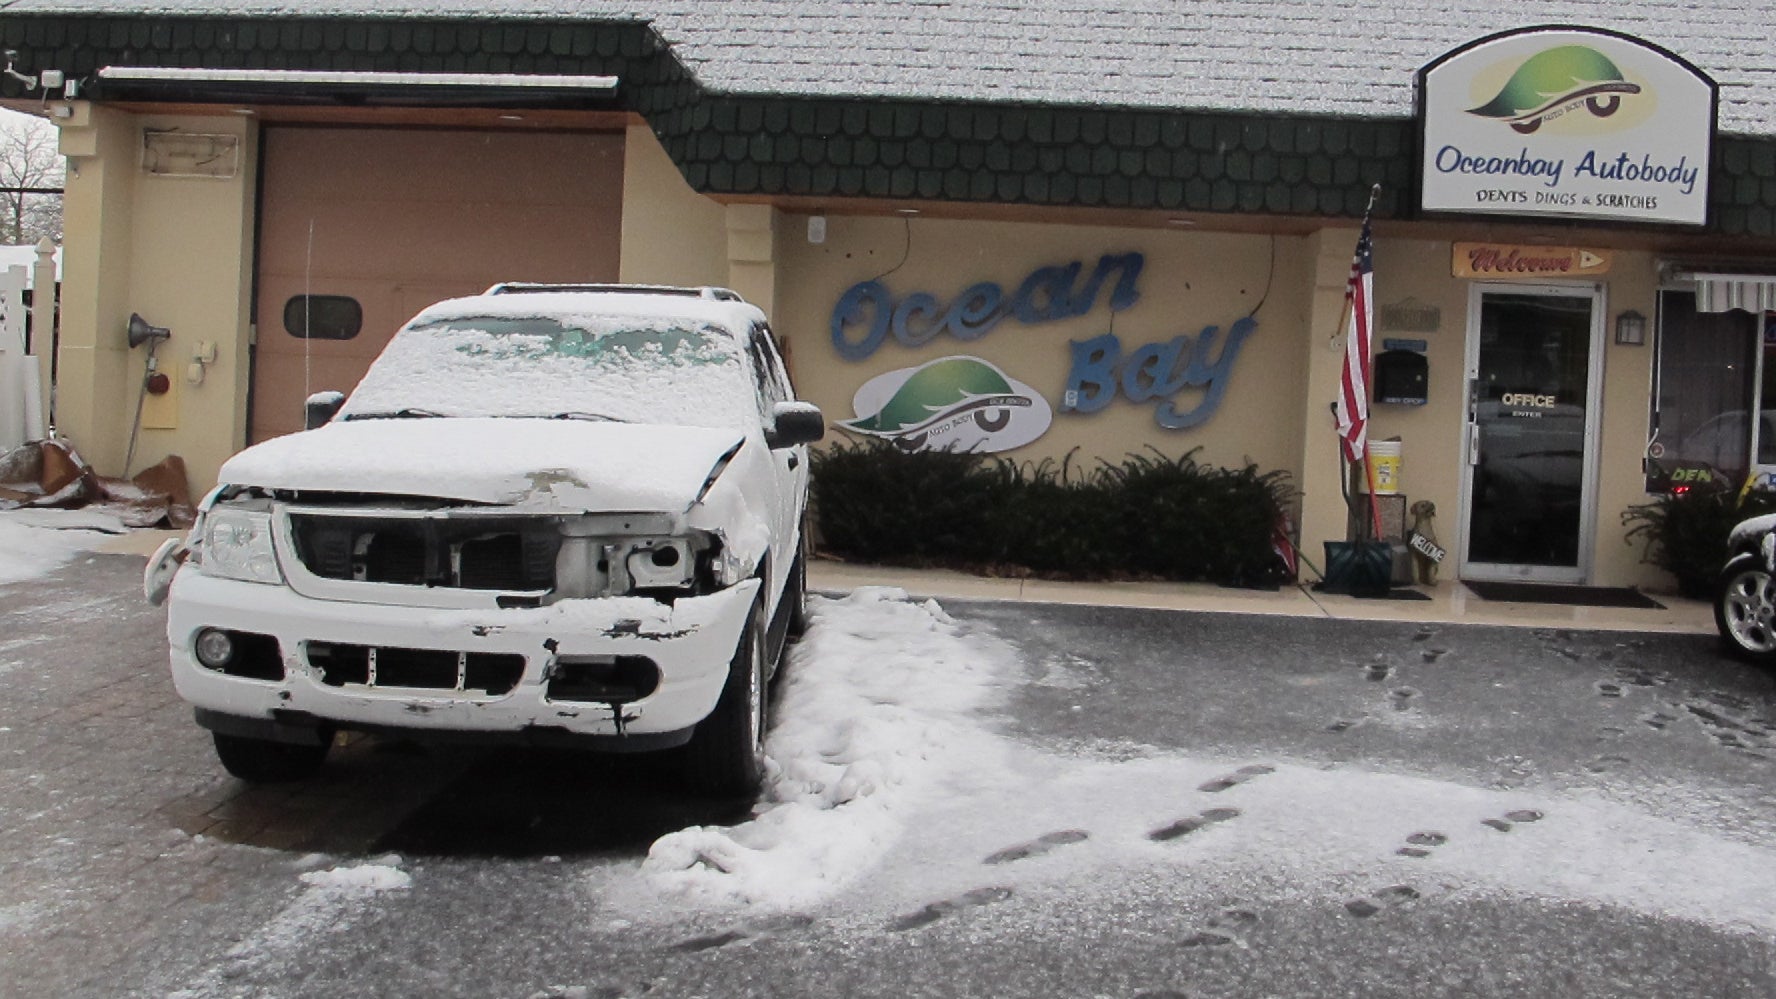  A vehicle that was damaged during the snowstorms awaits reports at Oceanbay Autobody in Point Pleasant, New Jersey (Phil Gregory/NewsWorks Photo) 